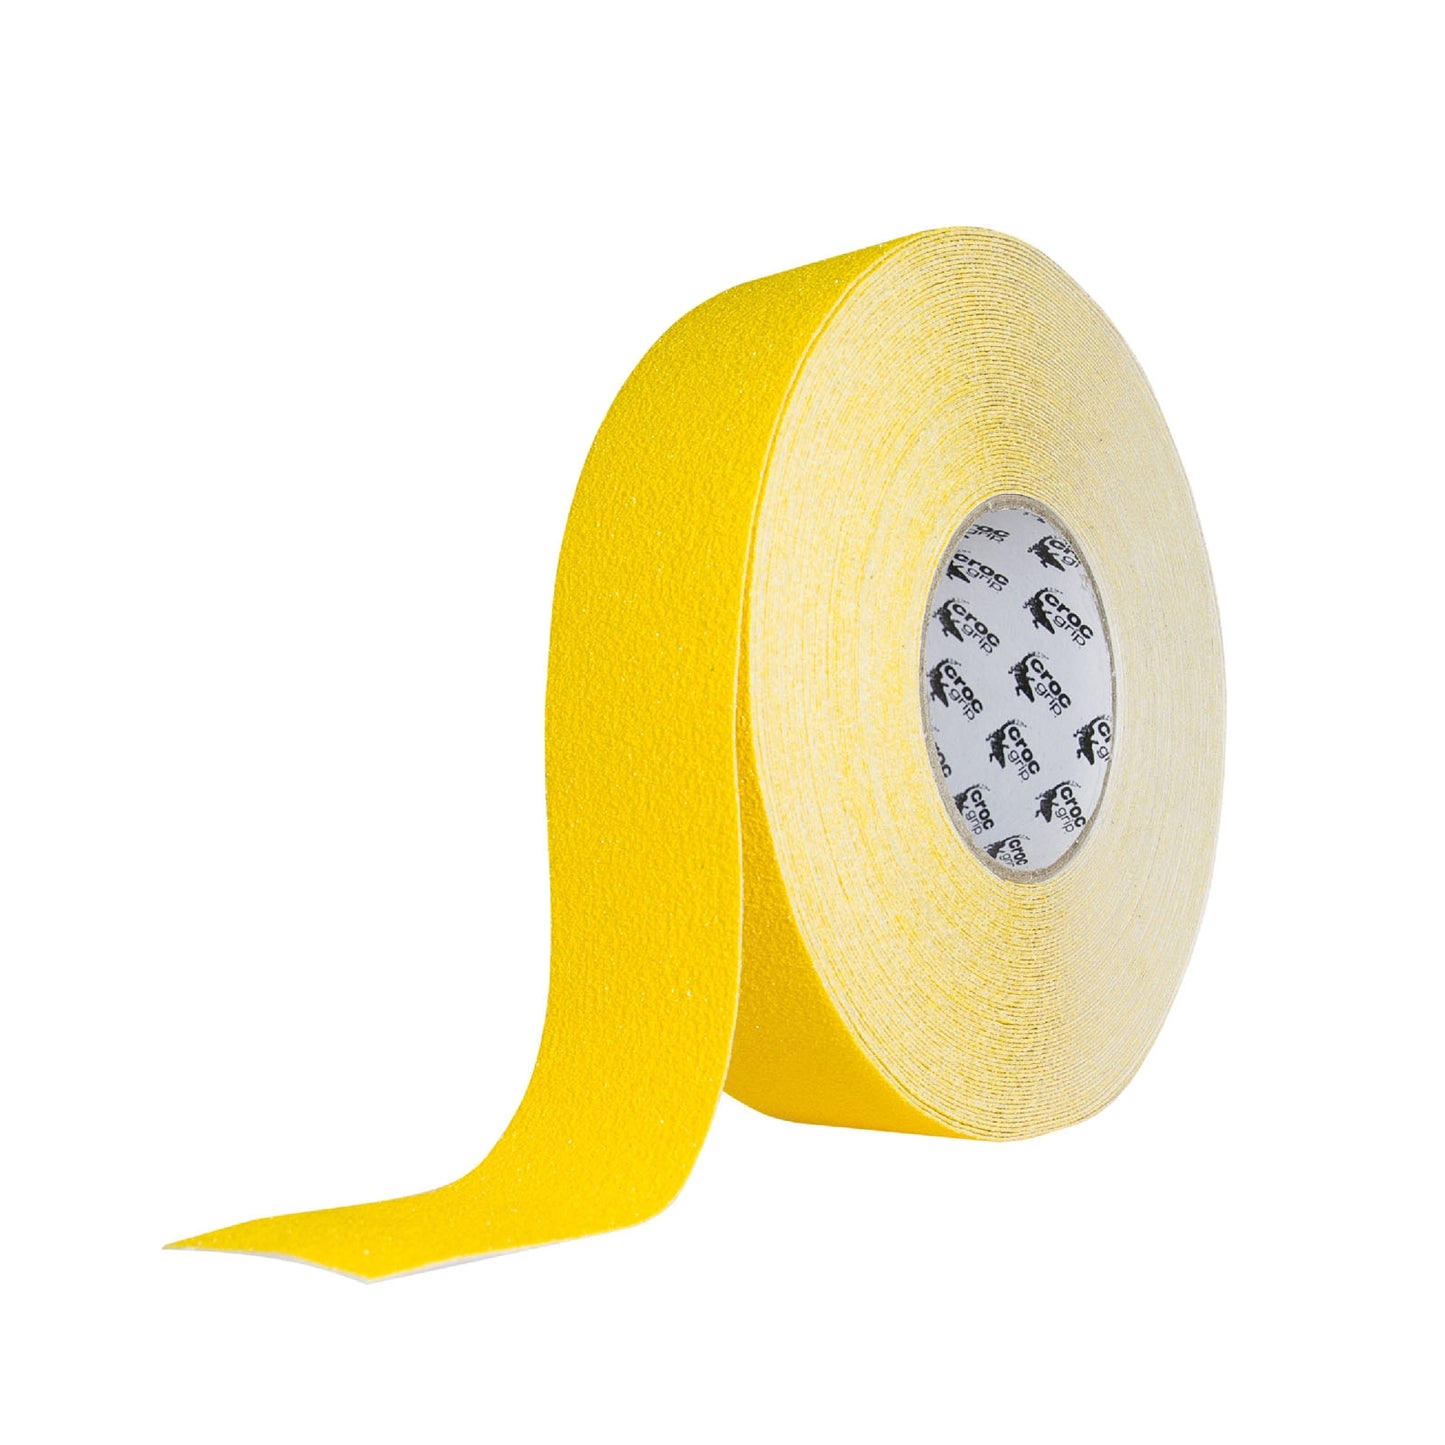 25M x 50MM Yellow Commercial High Grit Anti-Slip Tape